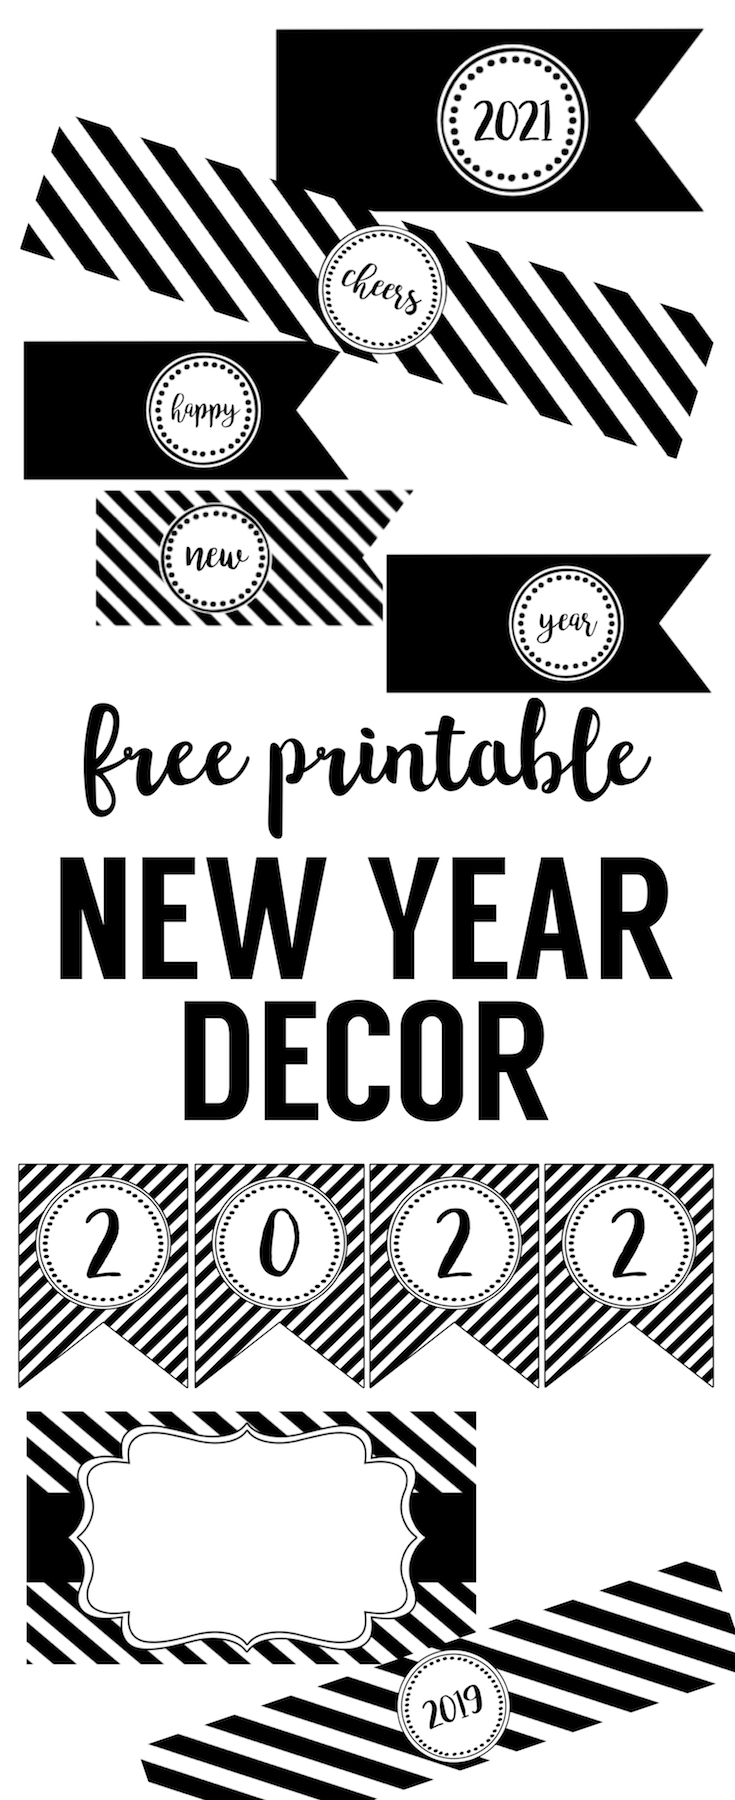 Happy New Year Party Printables. Free printable decor for your New Years Eve party. New years flags, bottle wrappers, banner, food labels, photo booth, and more.